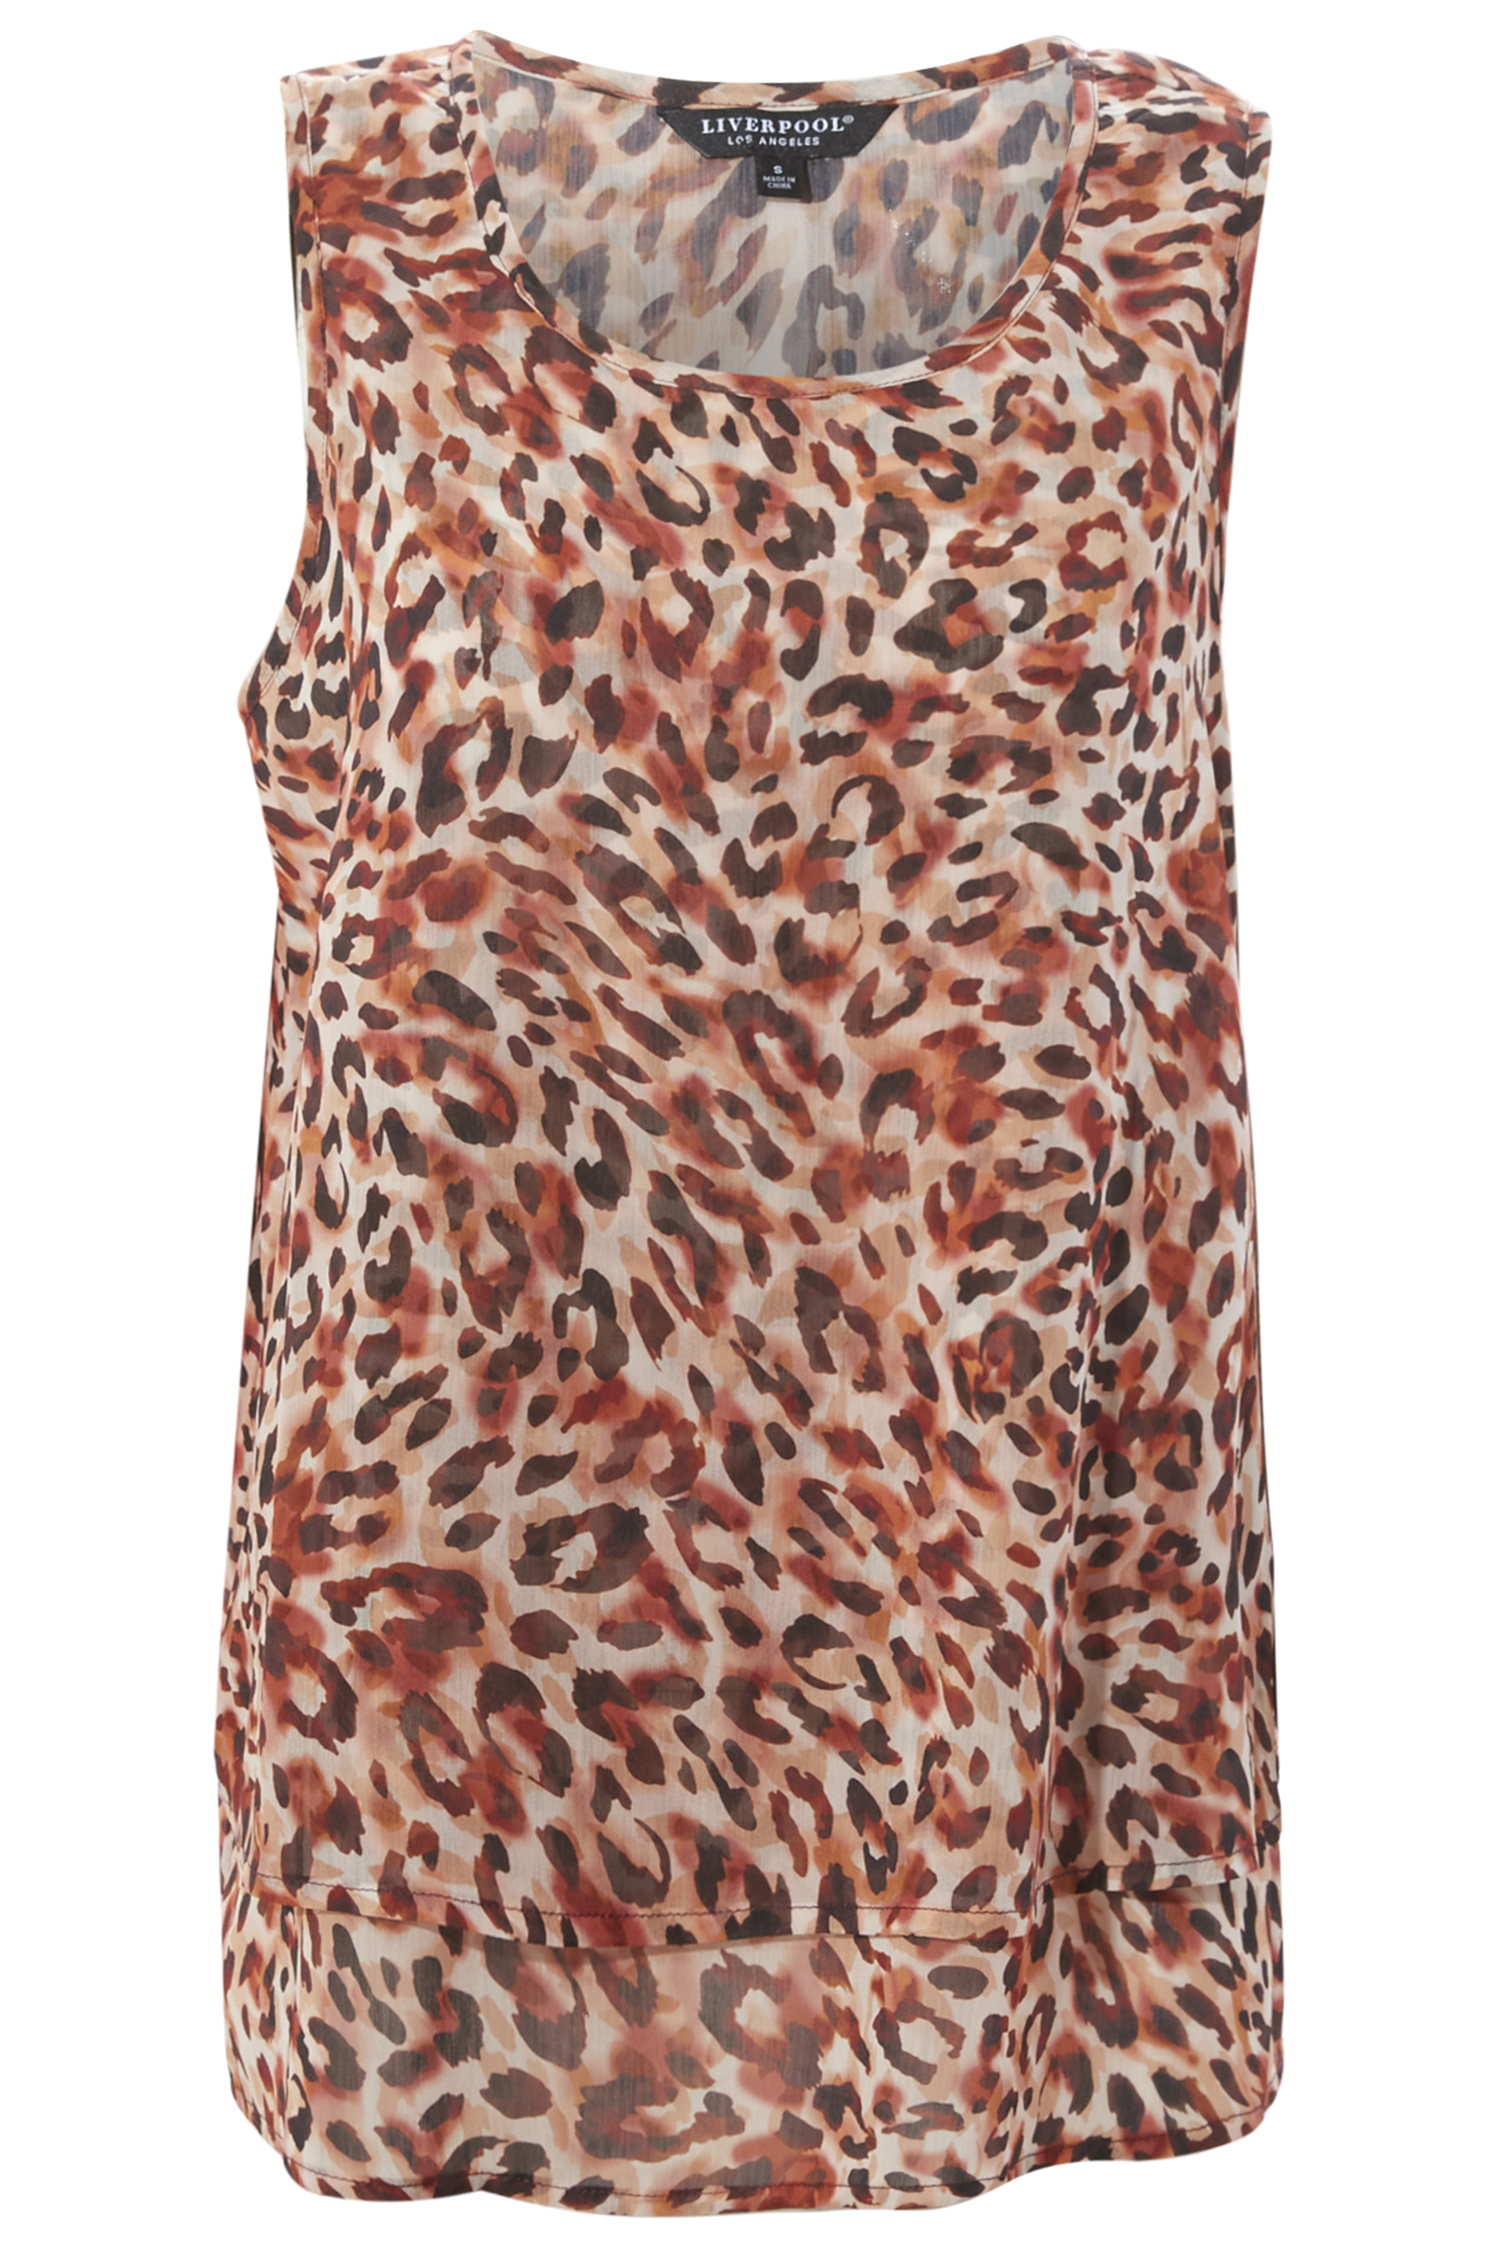 Liverpool Double Layered Sleeveless Top